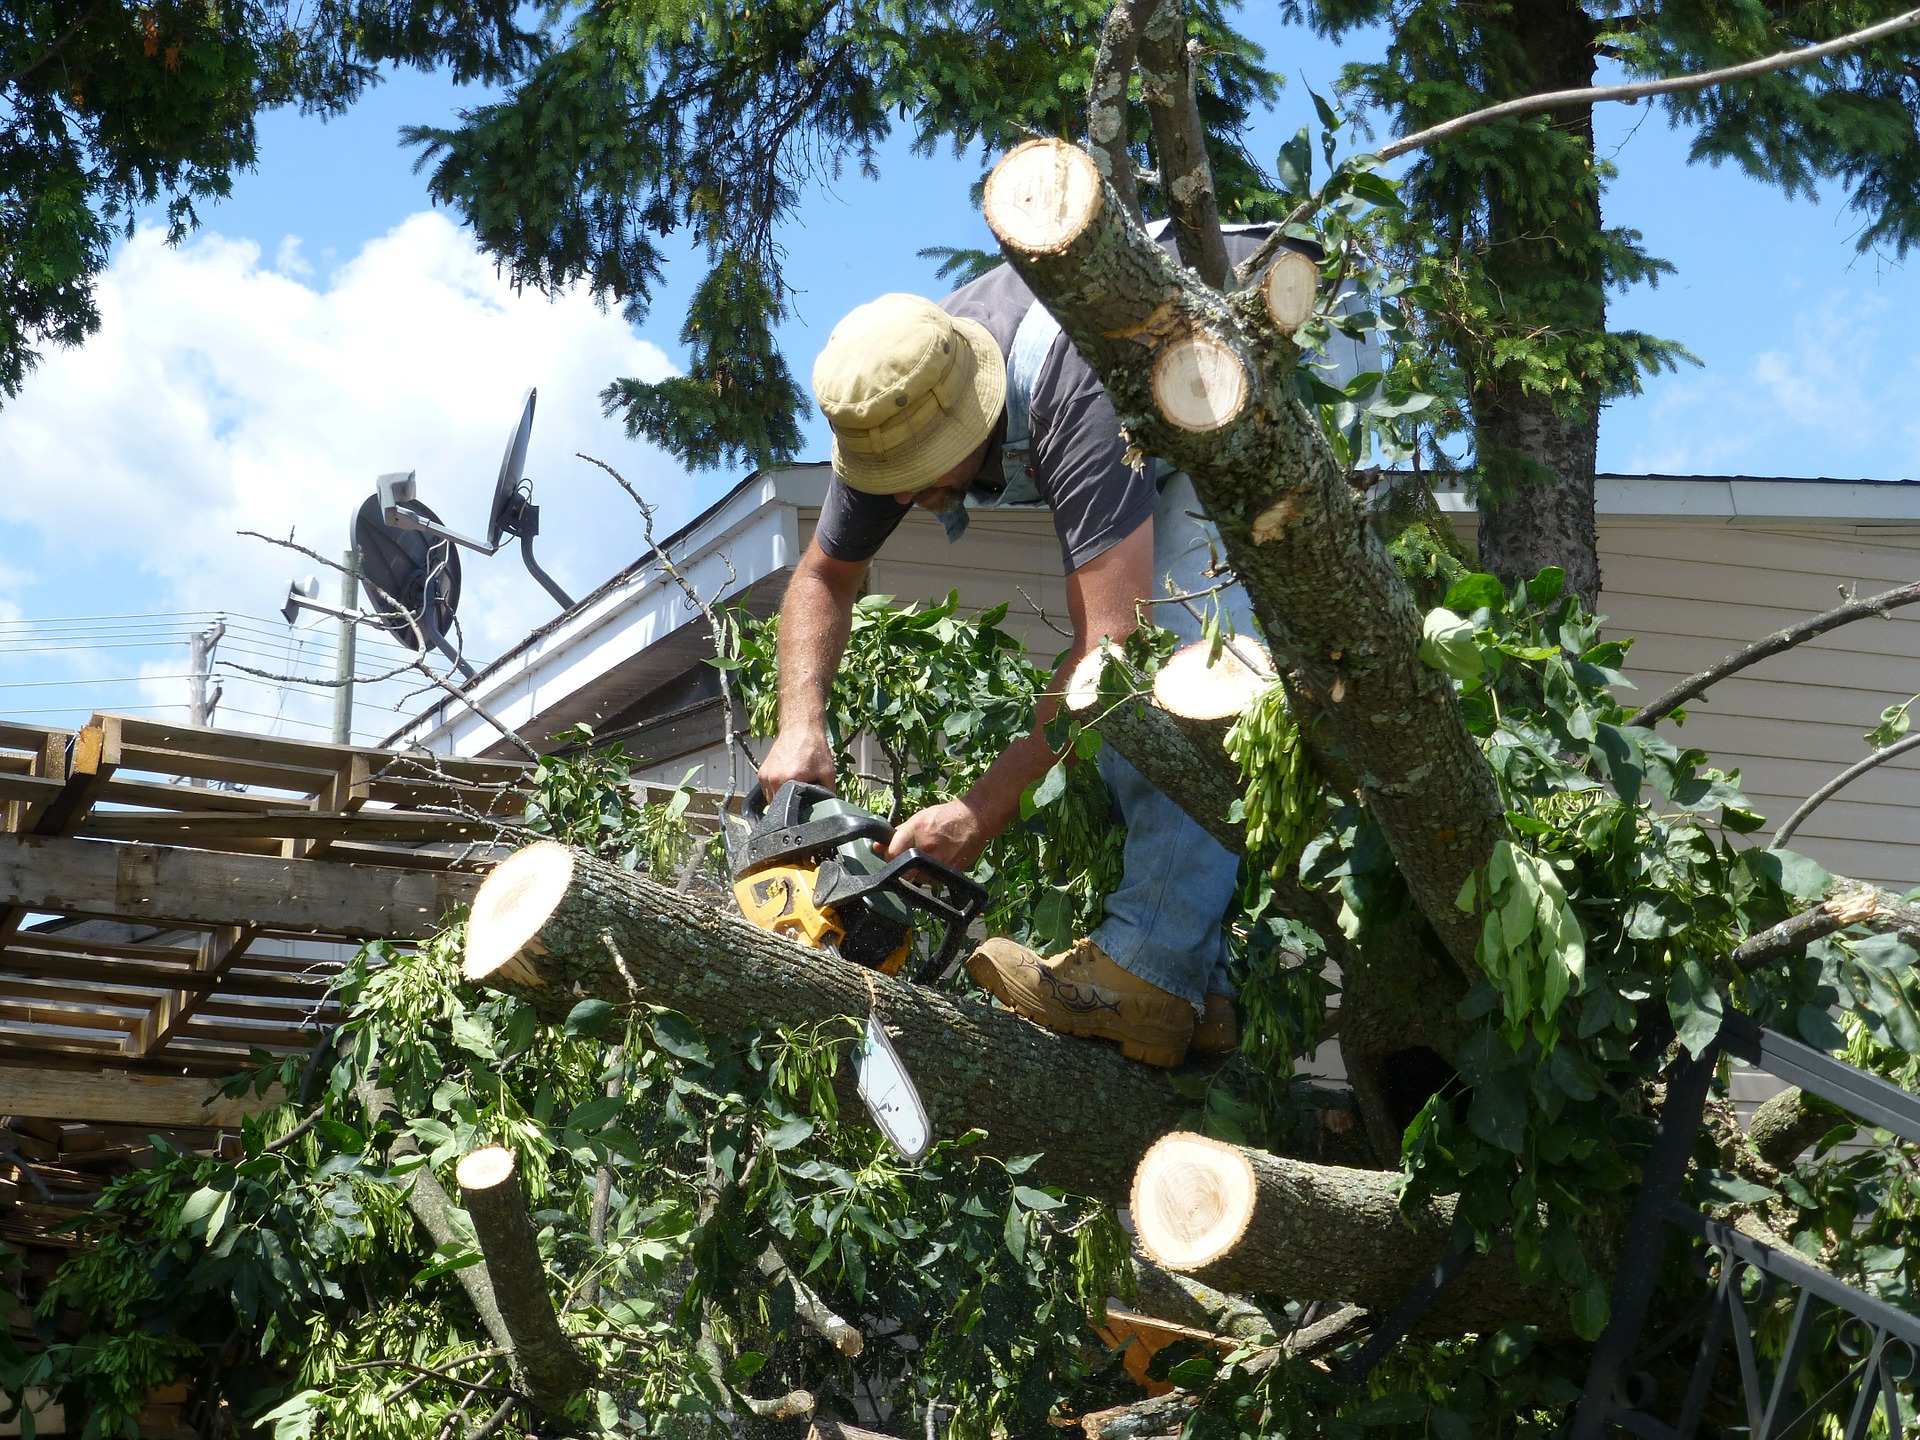 Fallen Tree Removal Services